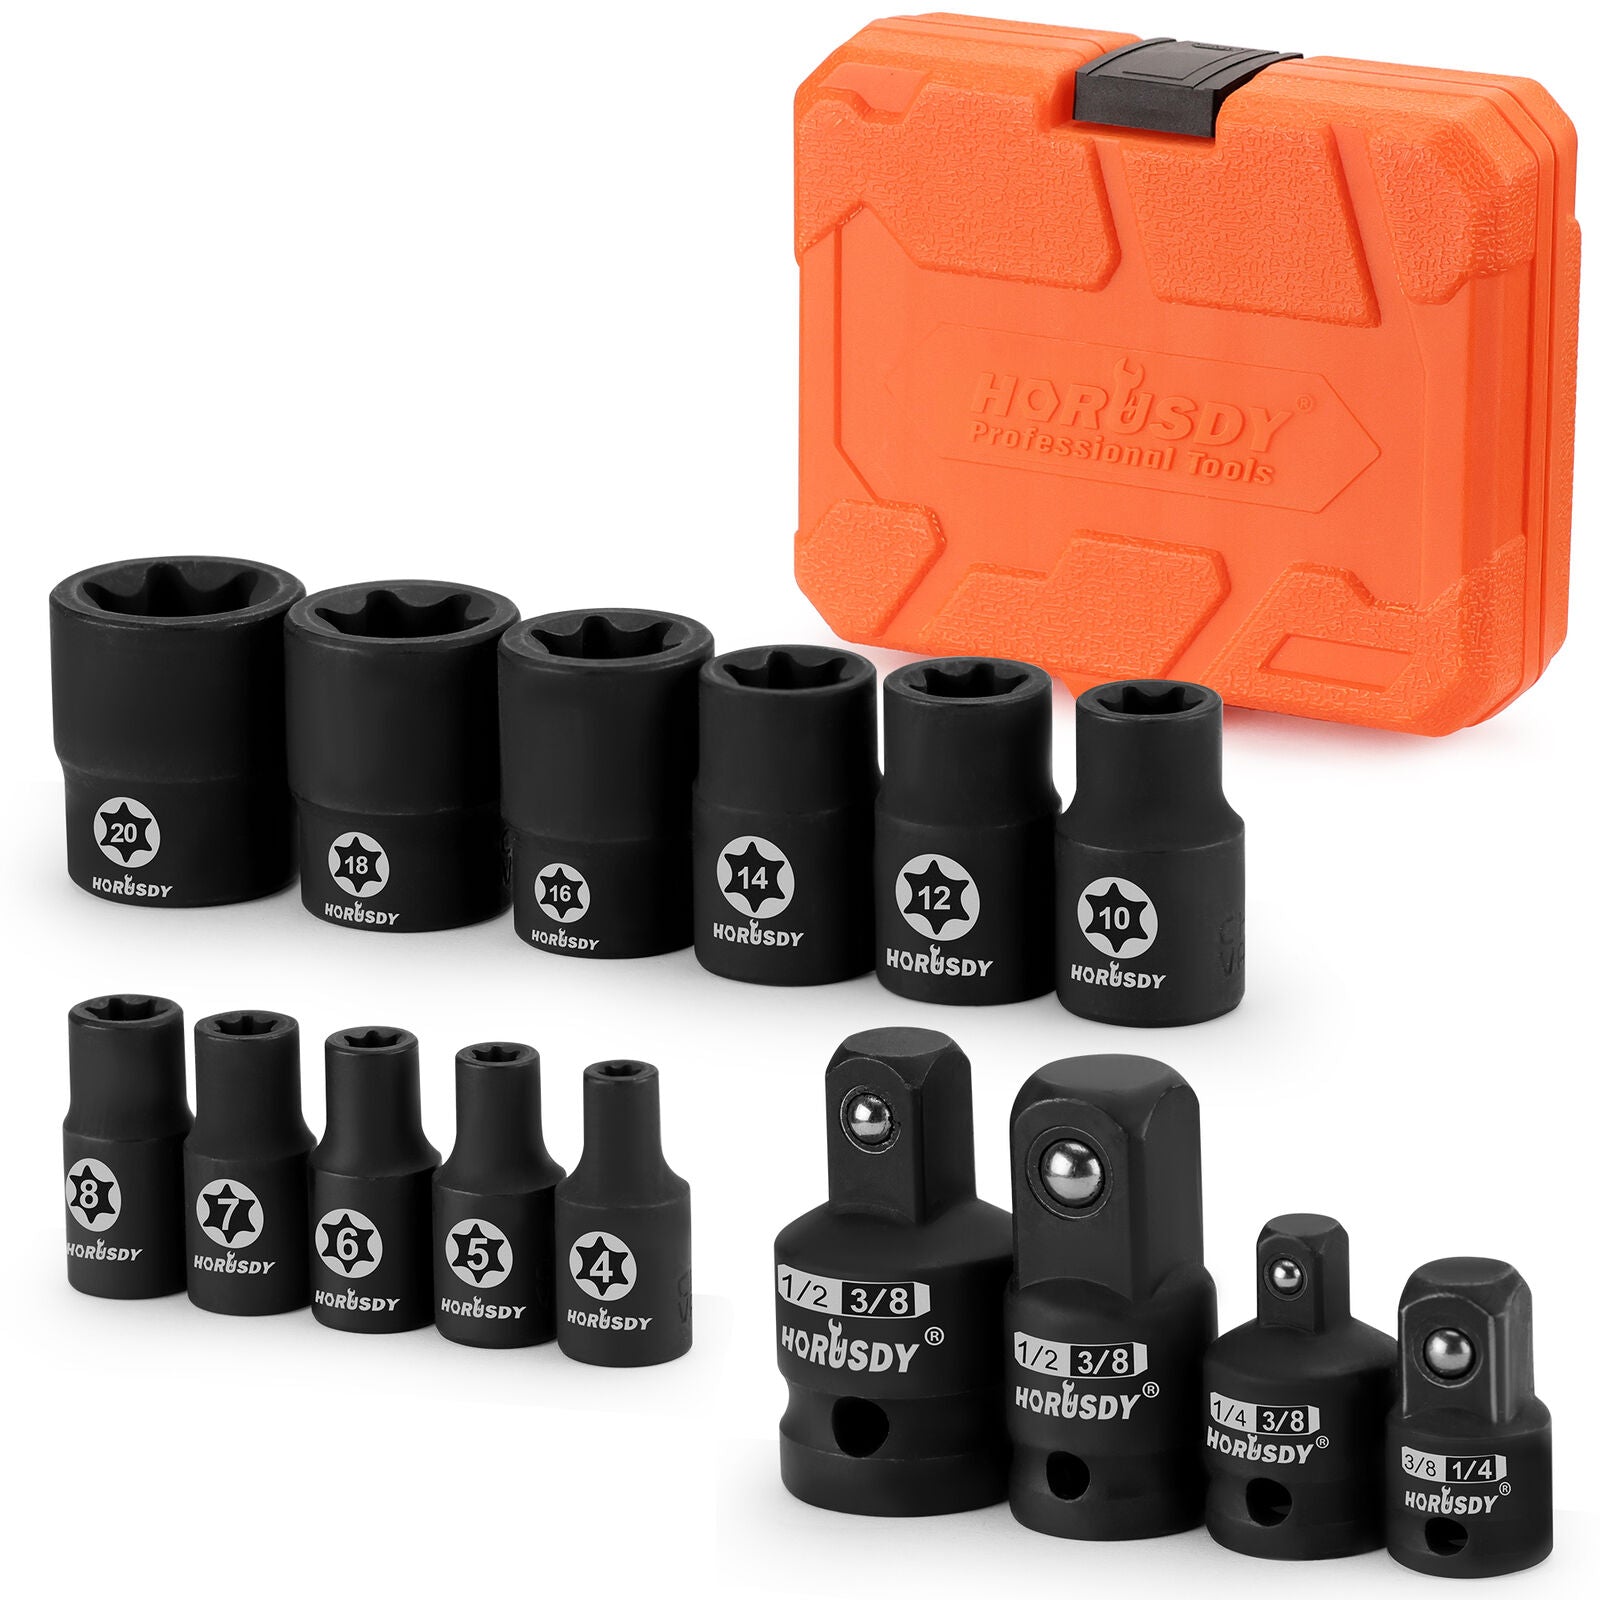 15 Piece E-Torx Female Adapter Socket Set | 1/2" 1/4" 3/8" - South East Clearance Centre